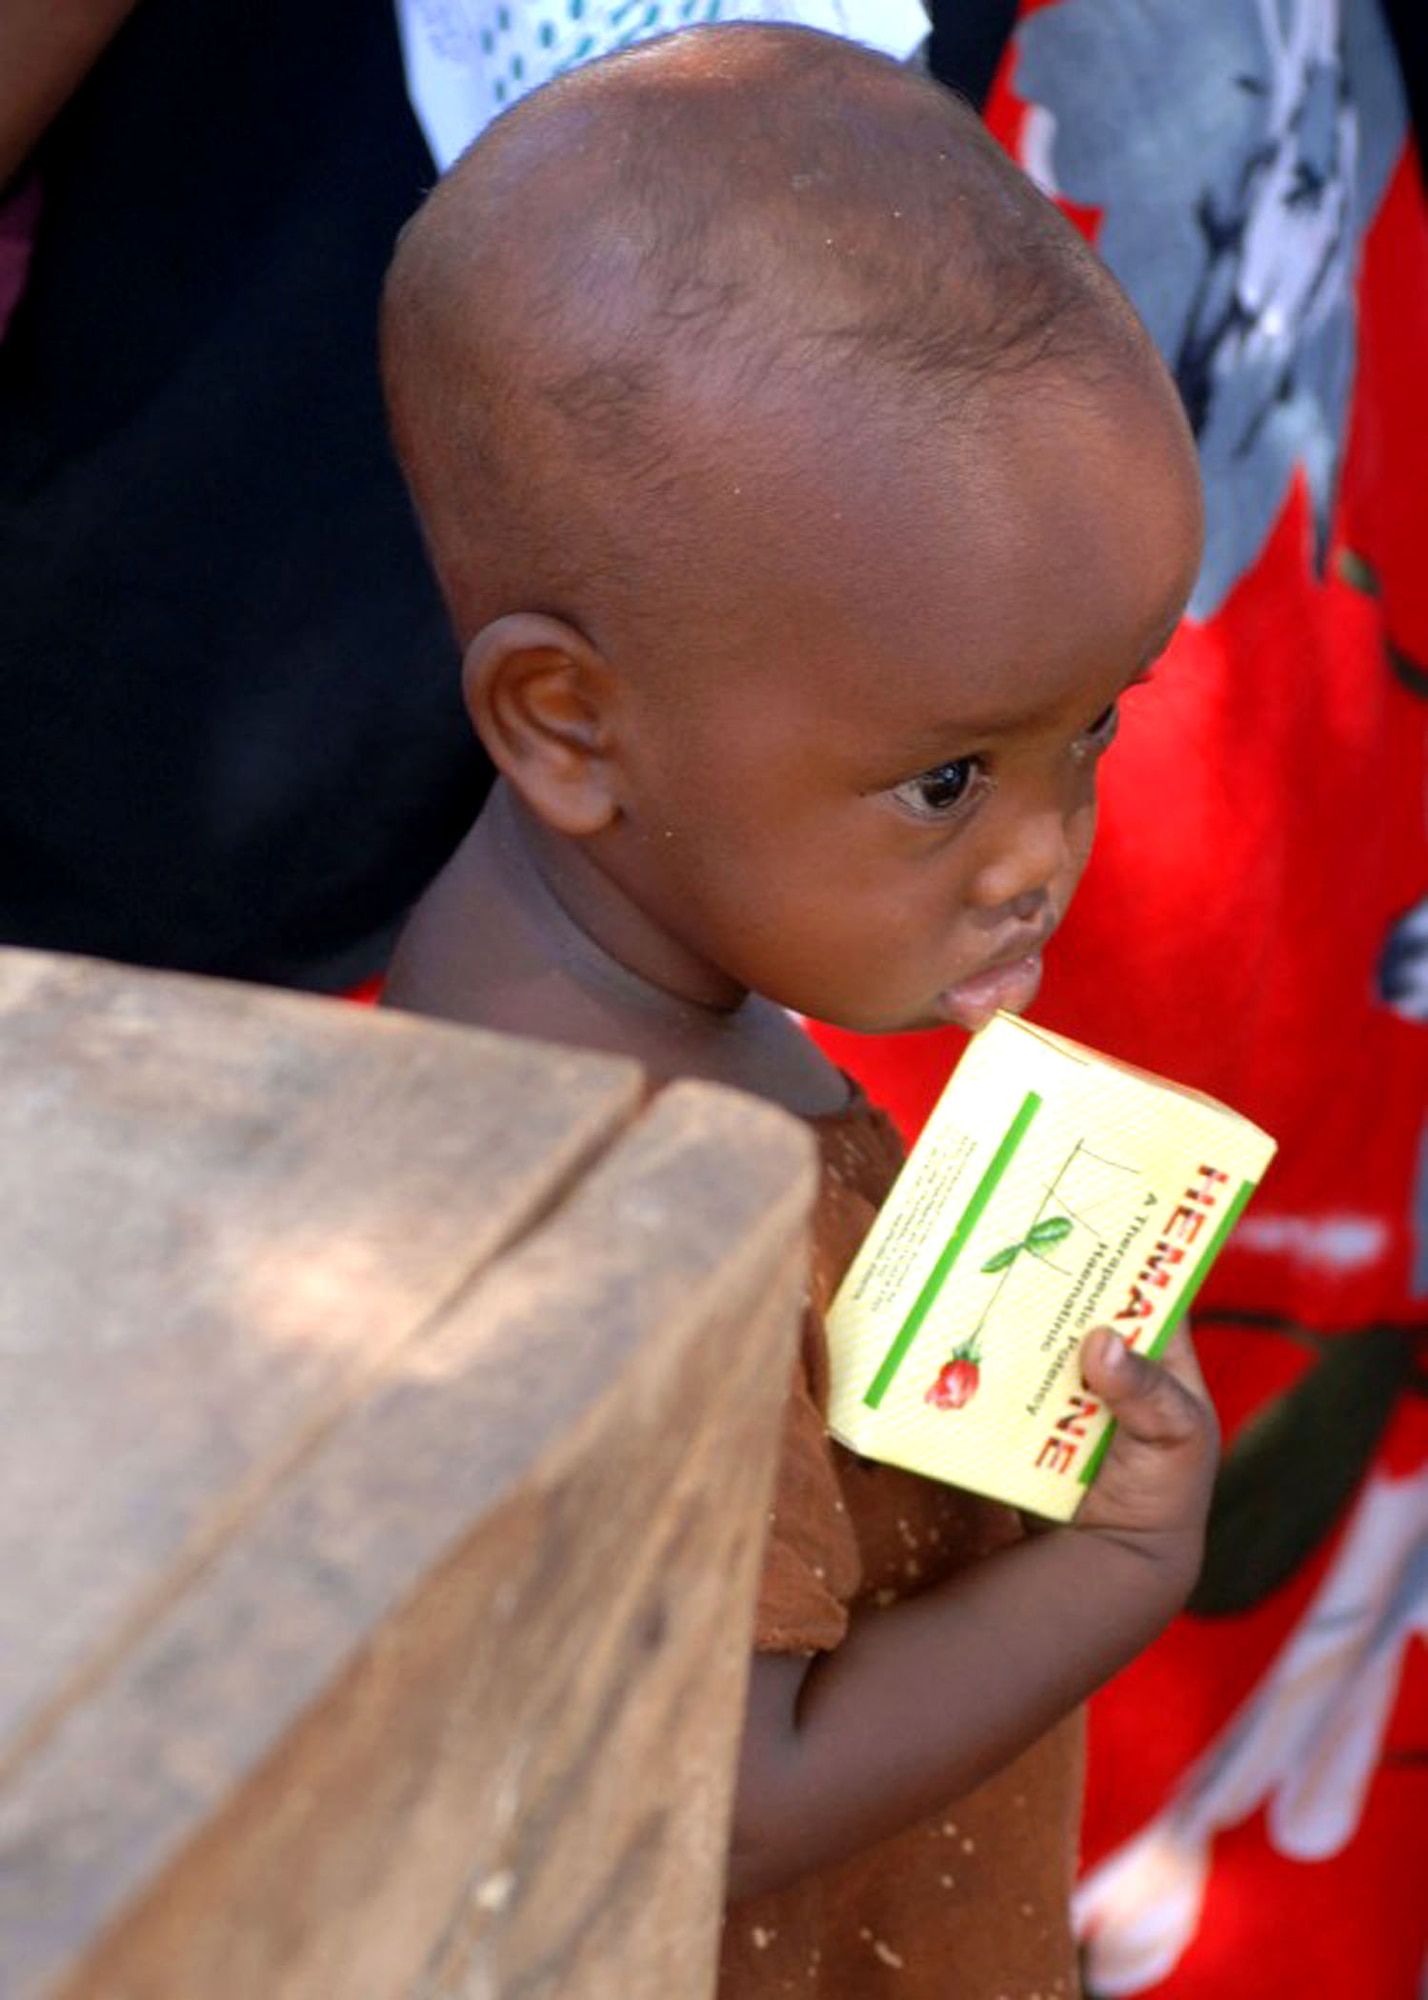 A child holds a box of medication during a Combined Joint Task Force - Horn of Africa Medical Civic Action Program in May in Kenya. CJTF-HOA servicemembers conducted the MEDCAP in the villages of Shimbir and Balich through a partnership with the Kenyan department of defense, which provided additional medical providers and logistical support. More than 1,000 people received healthcare as part of the project. (U.S. Air Force photo/Tech. Sgt. Carrie Bernard) 
